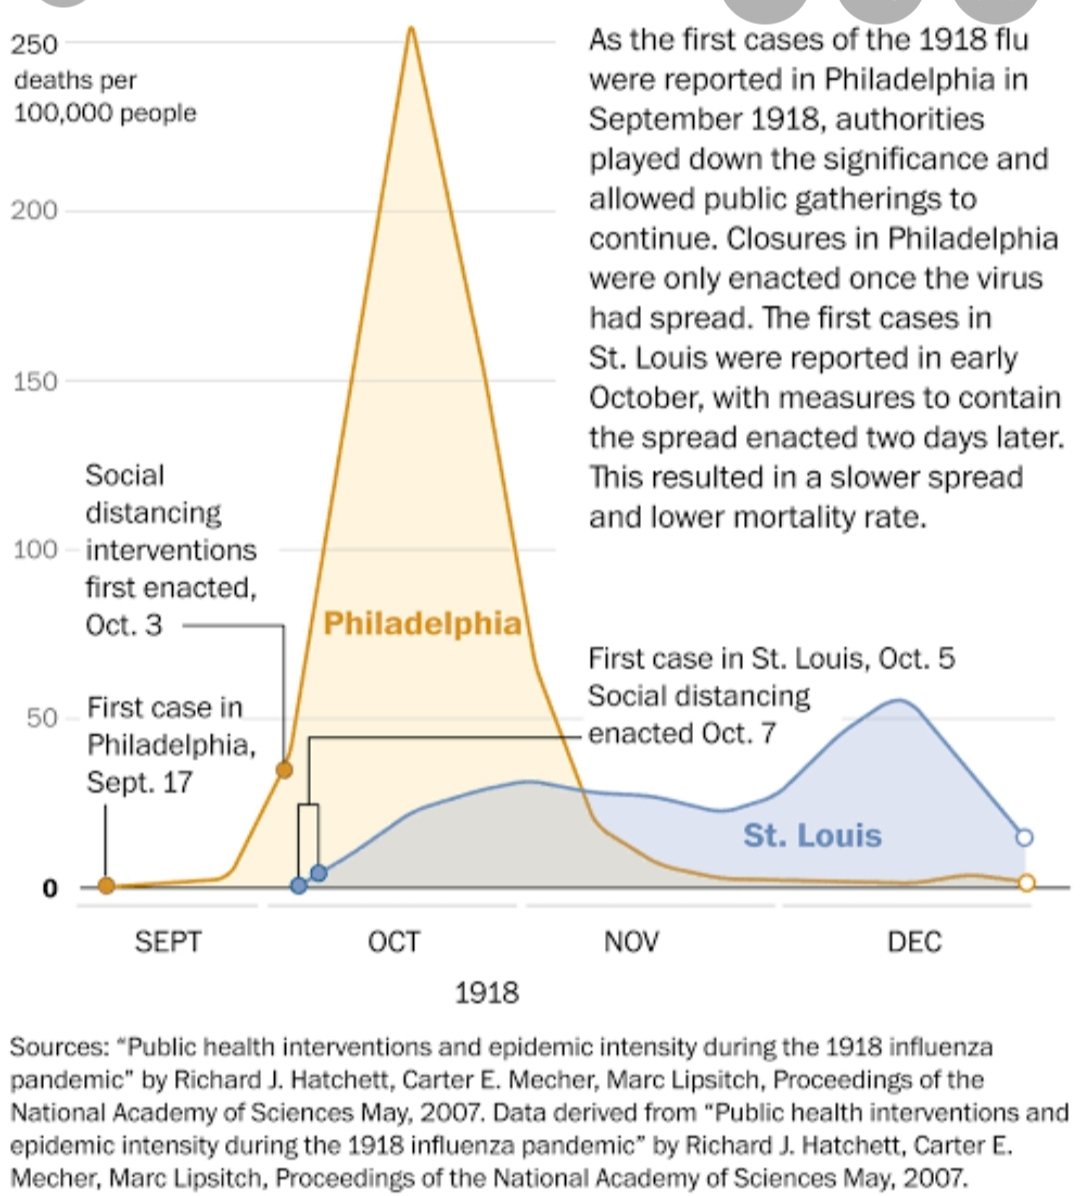 Social Distancing works in 1918 as well as 2020 and And countries which failed to lock down were too confident are facing grave risks(US/UK/Italy). Philadelphia also paid the price a century back.